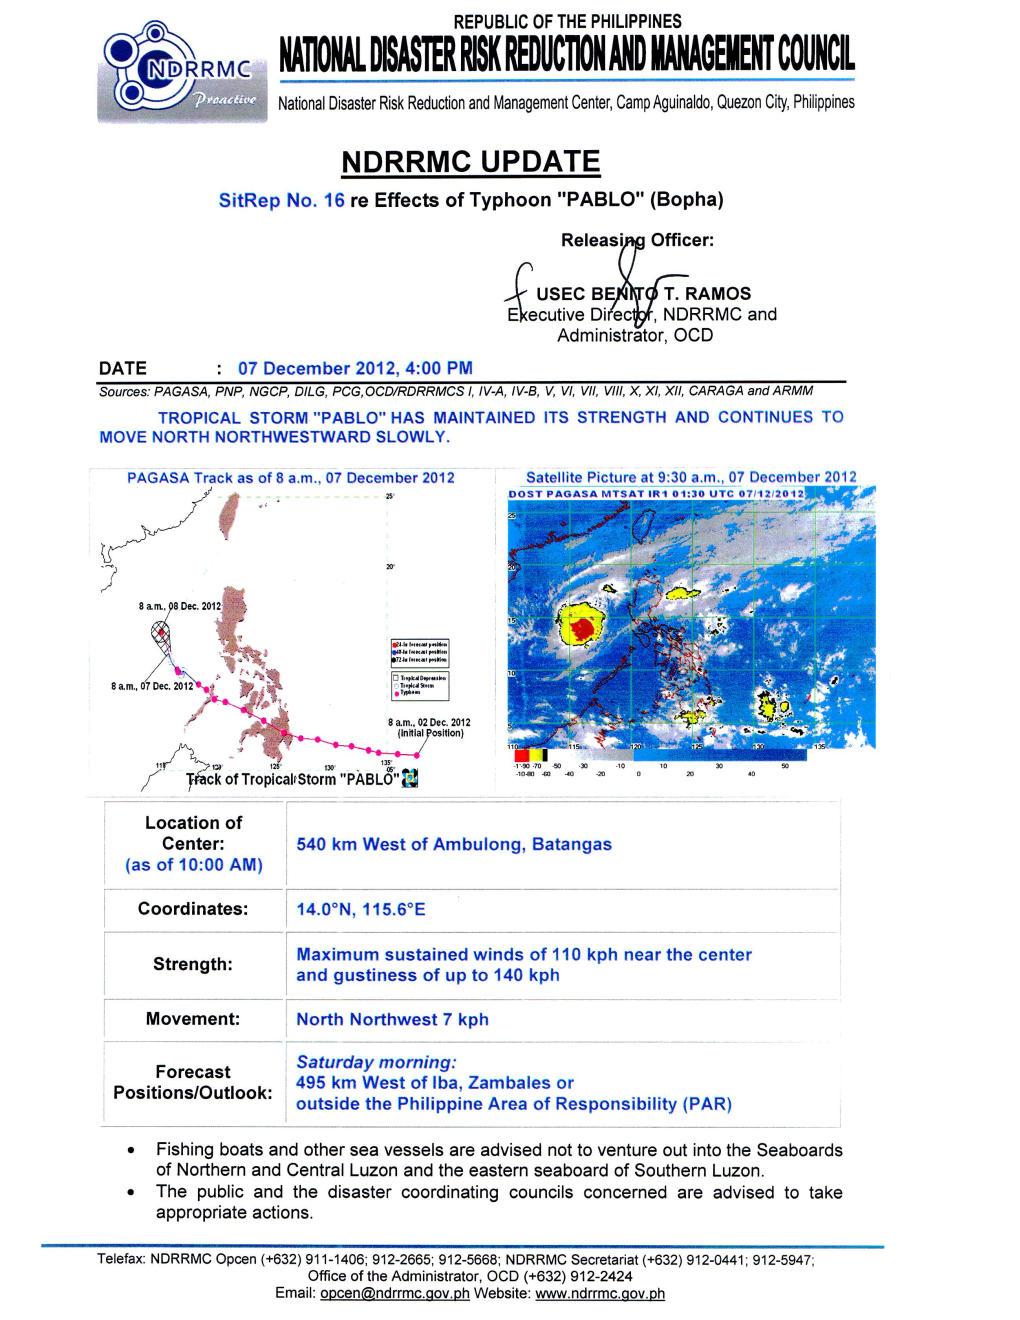 UPDATE Re Sitrep No.16 Re Effects of Typhoon PABLO 07 Dec 2012